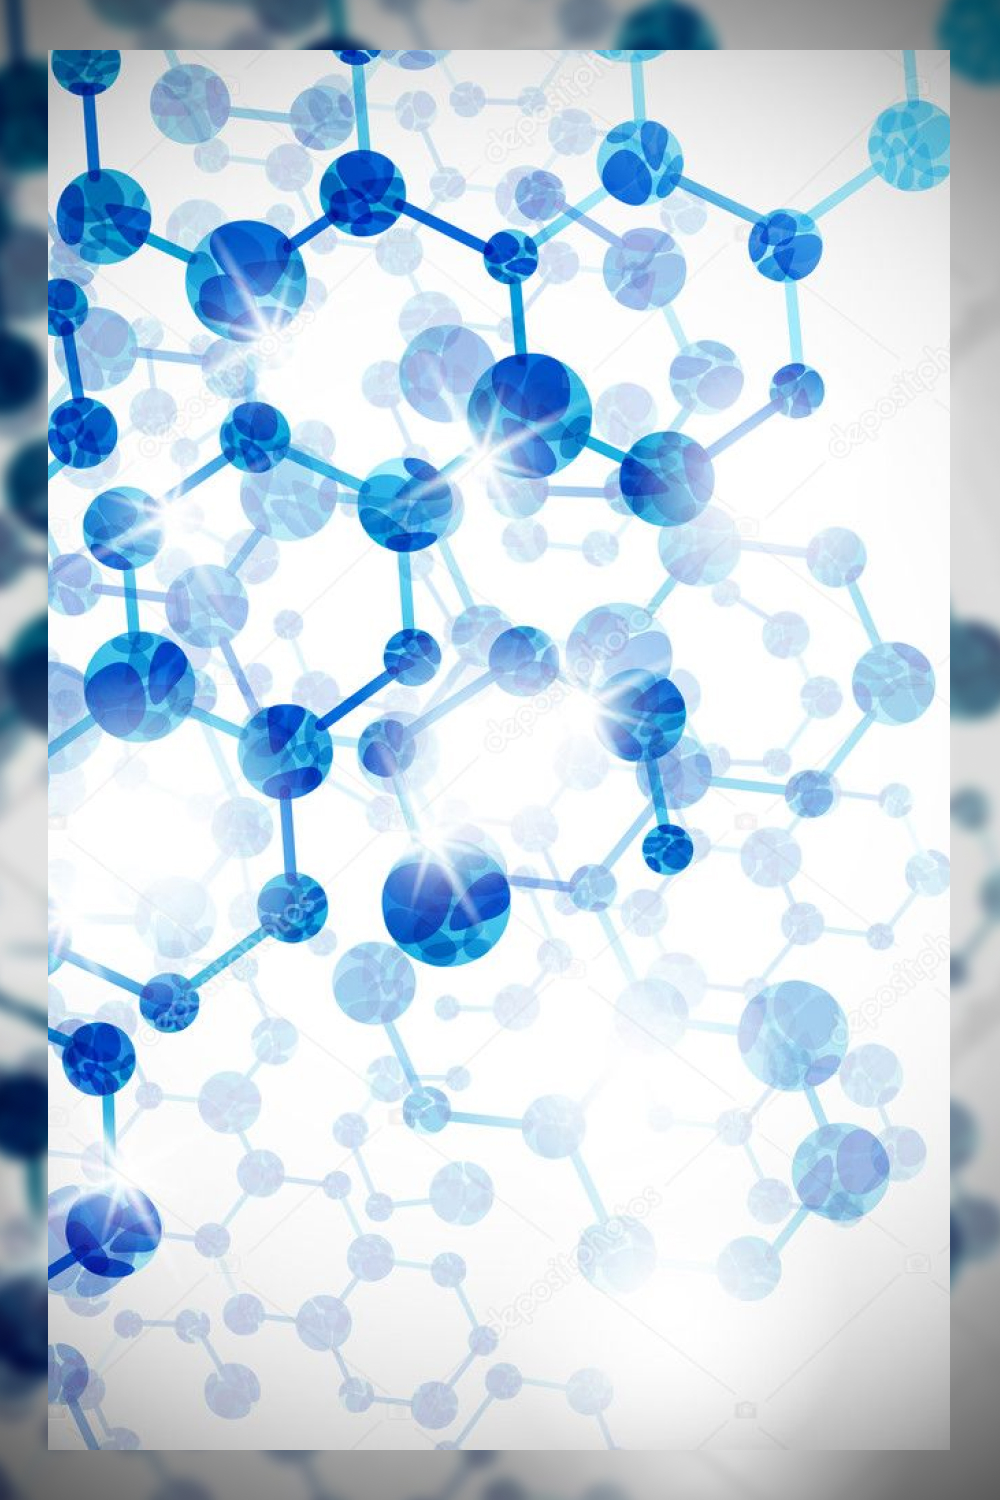 Molecular structure abstract background.